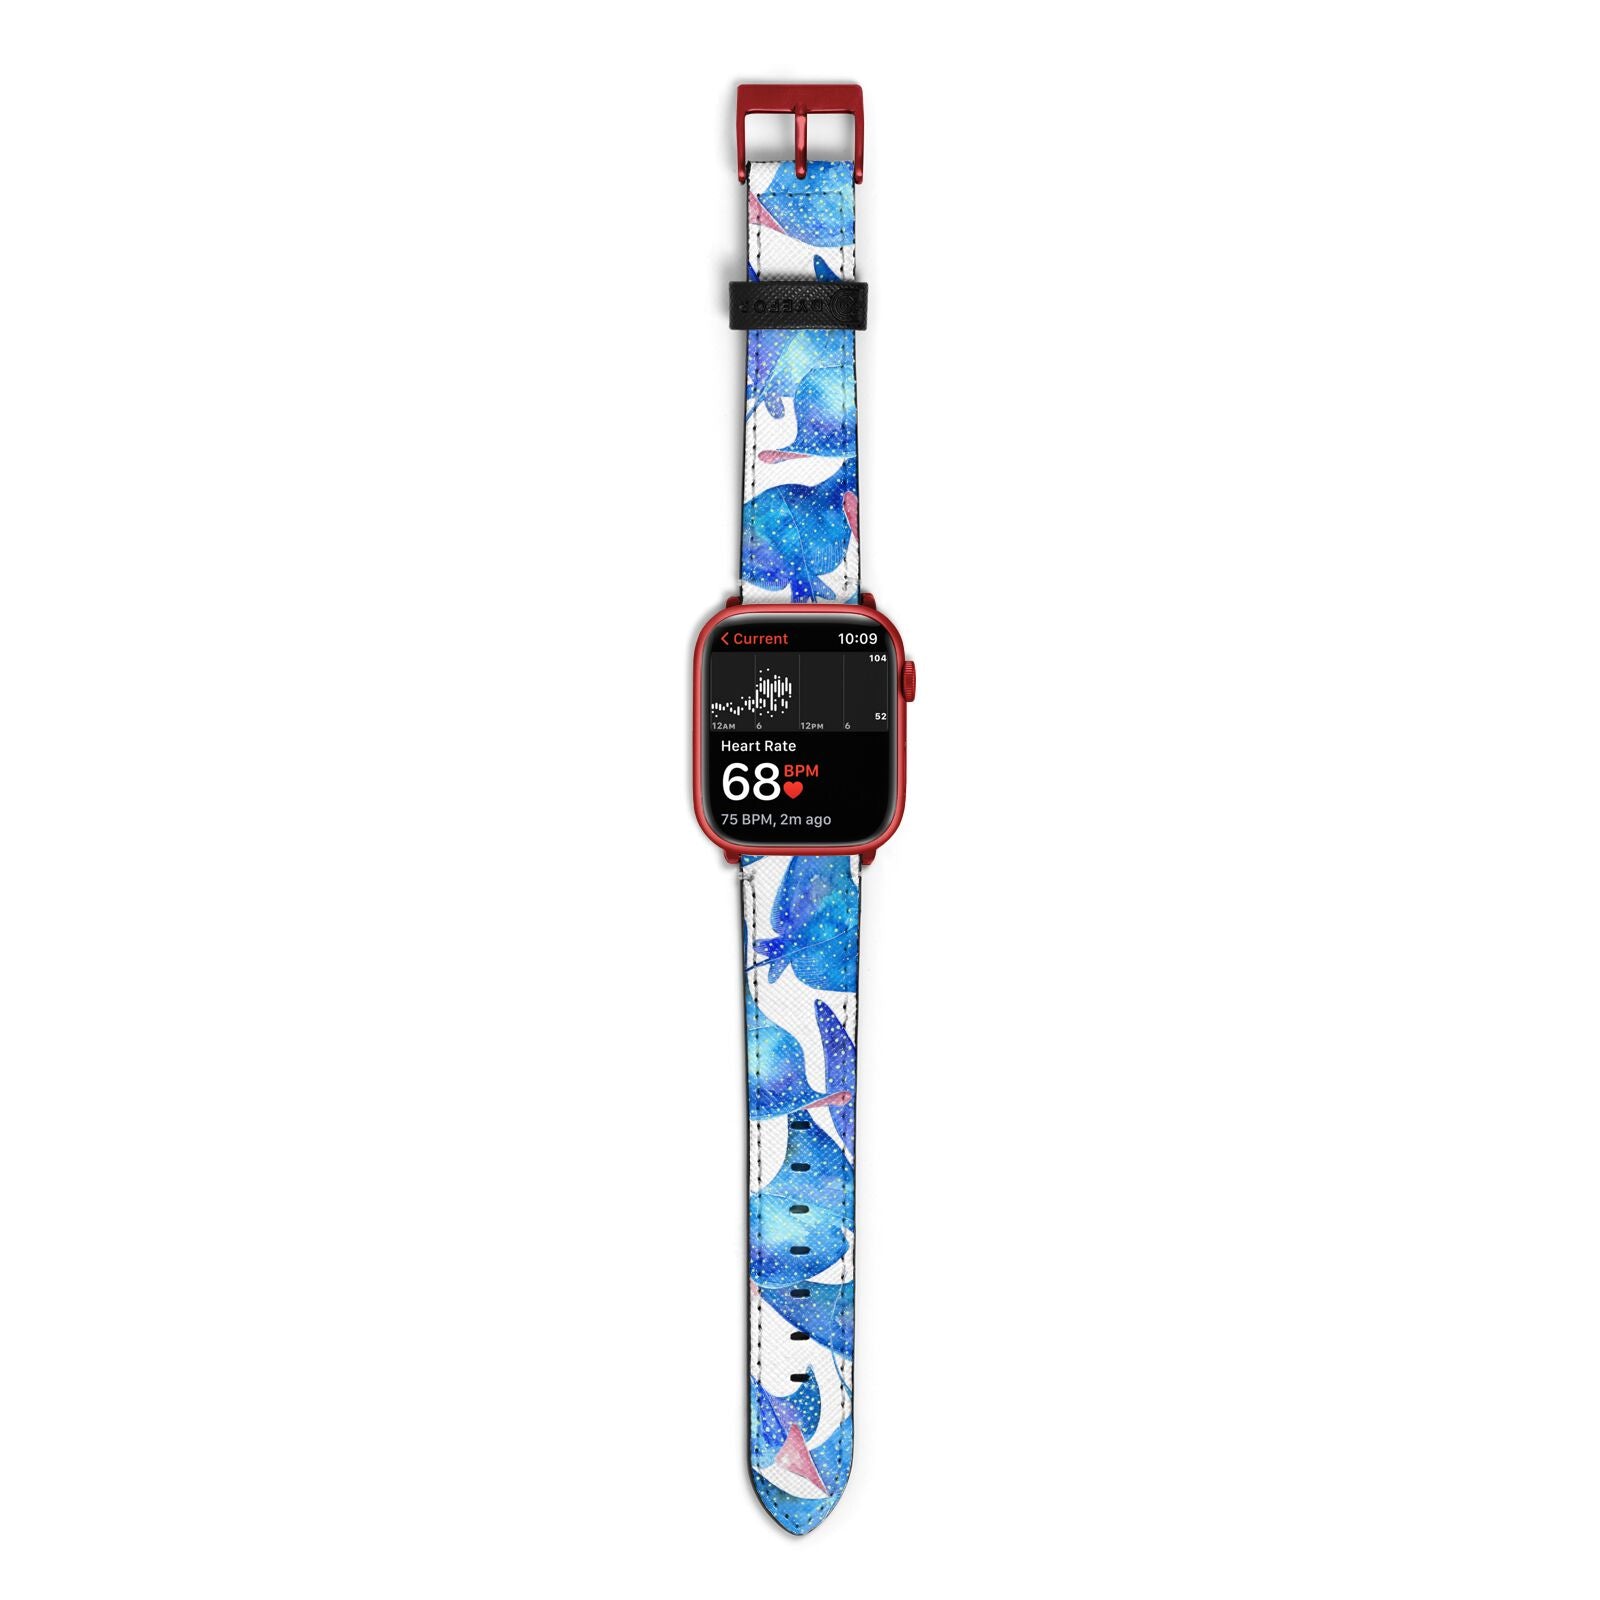 Devil Fish Apple Watch Strap Size 38mm with Red Hardware